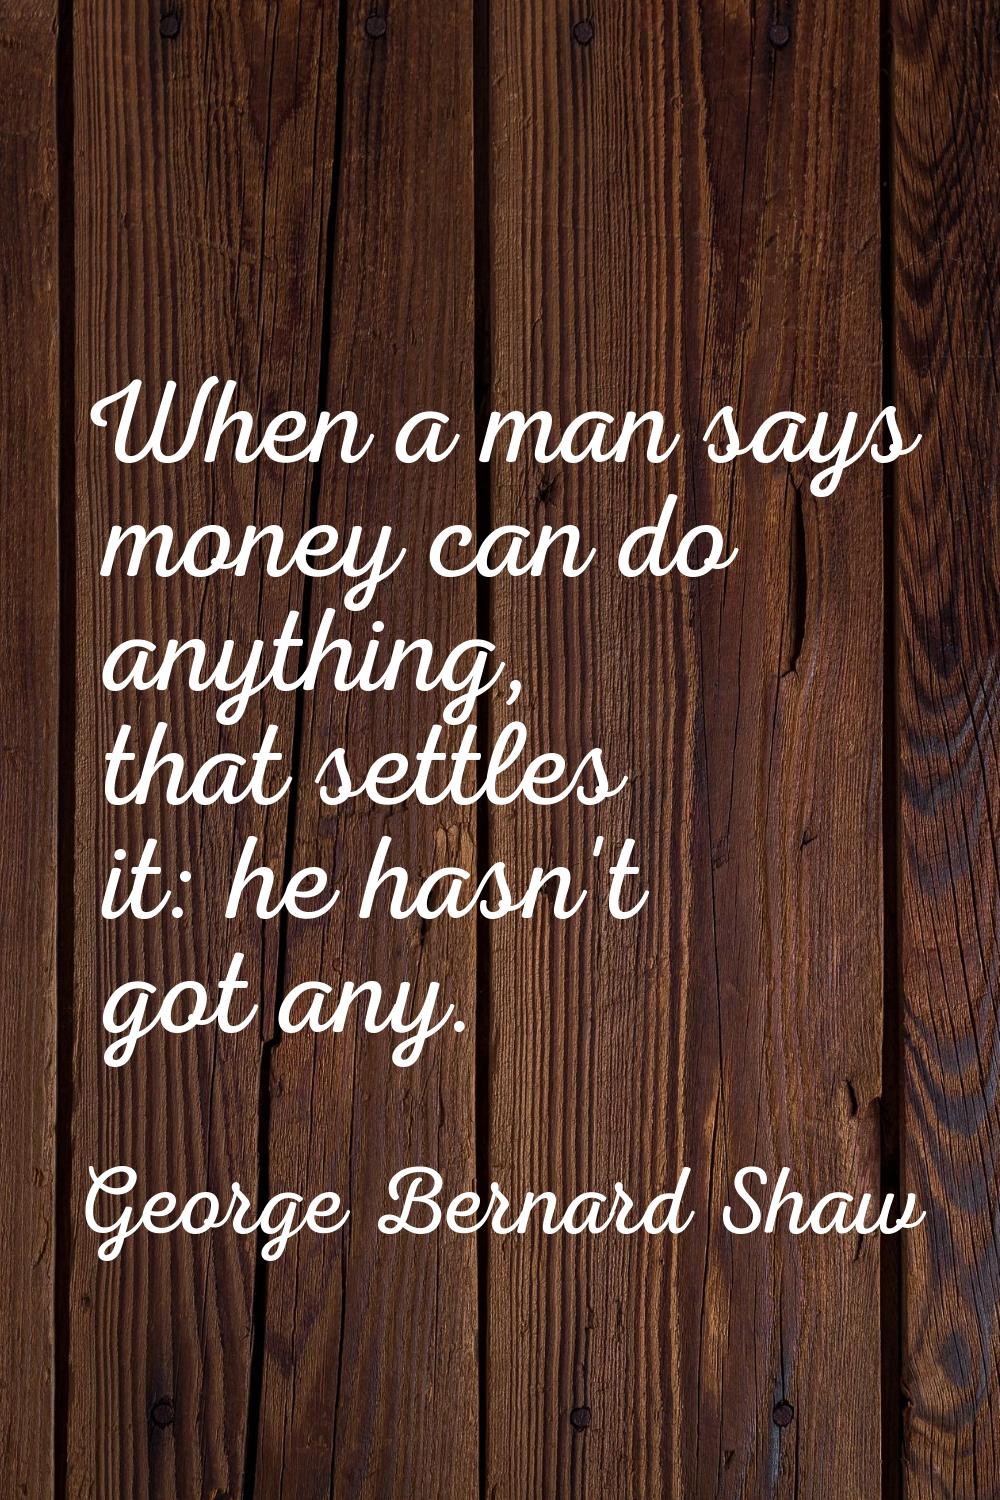 When a man says money can do anything, that settles it: he hasn't got any.